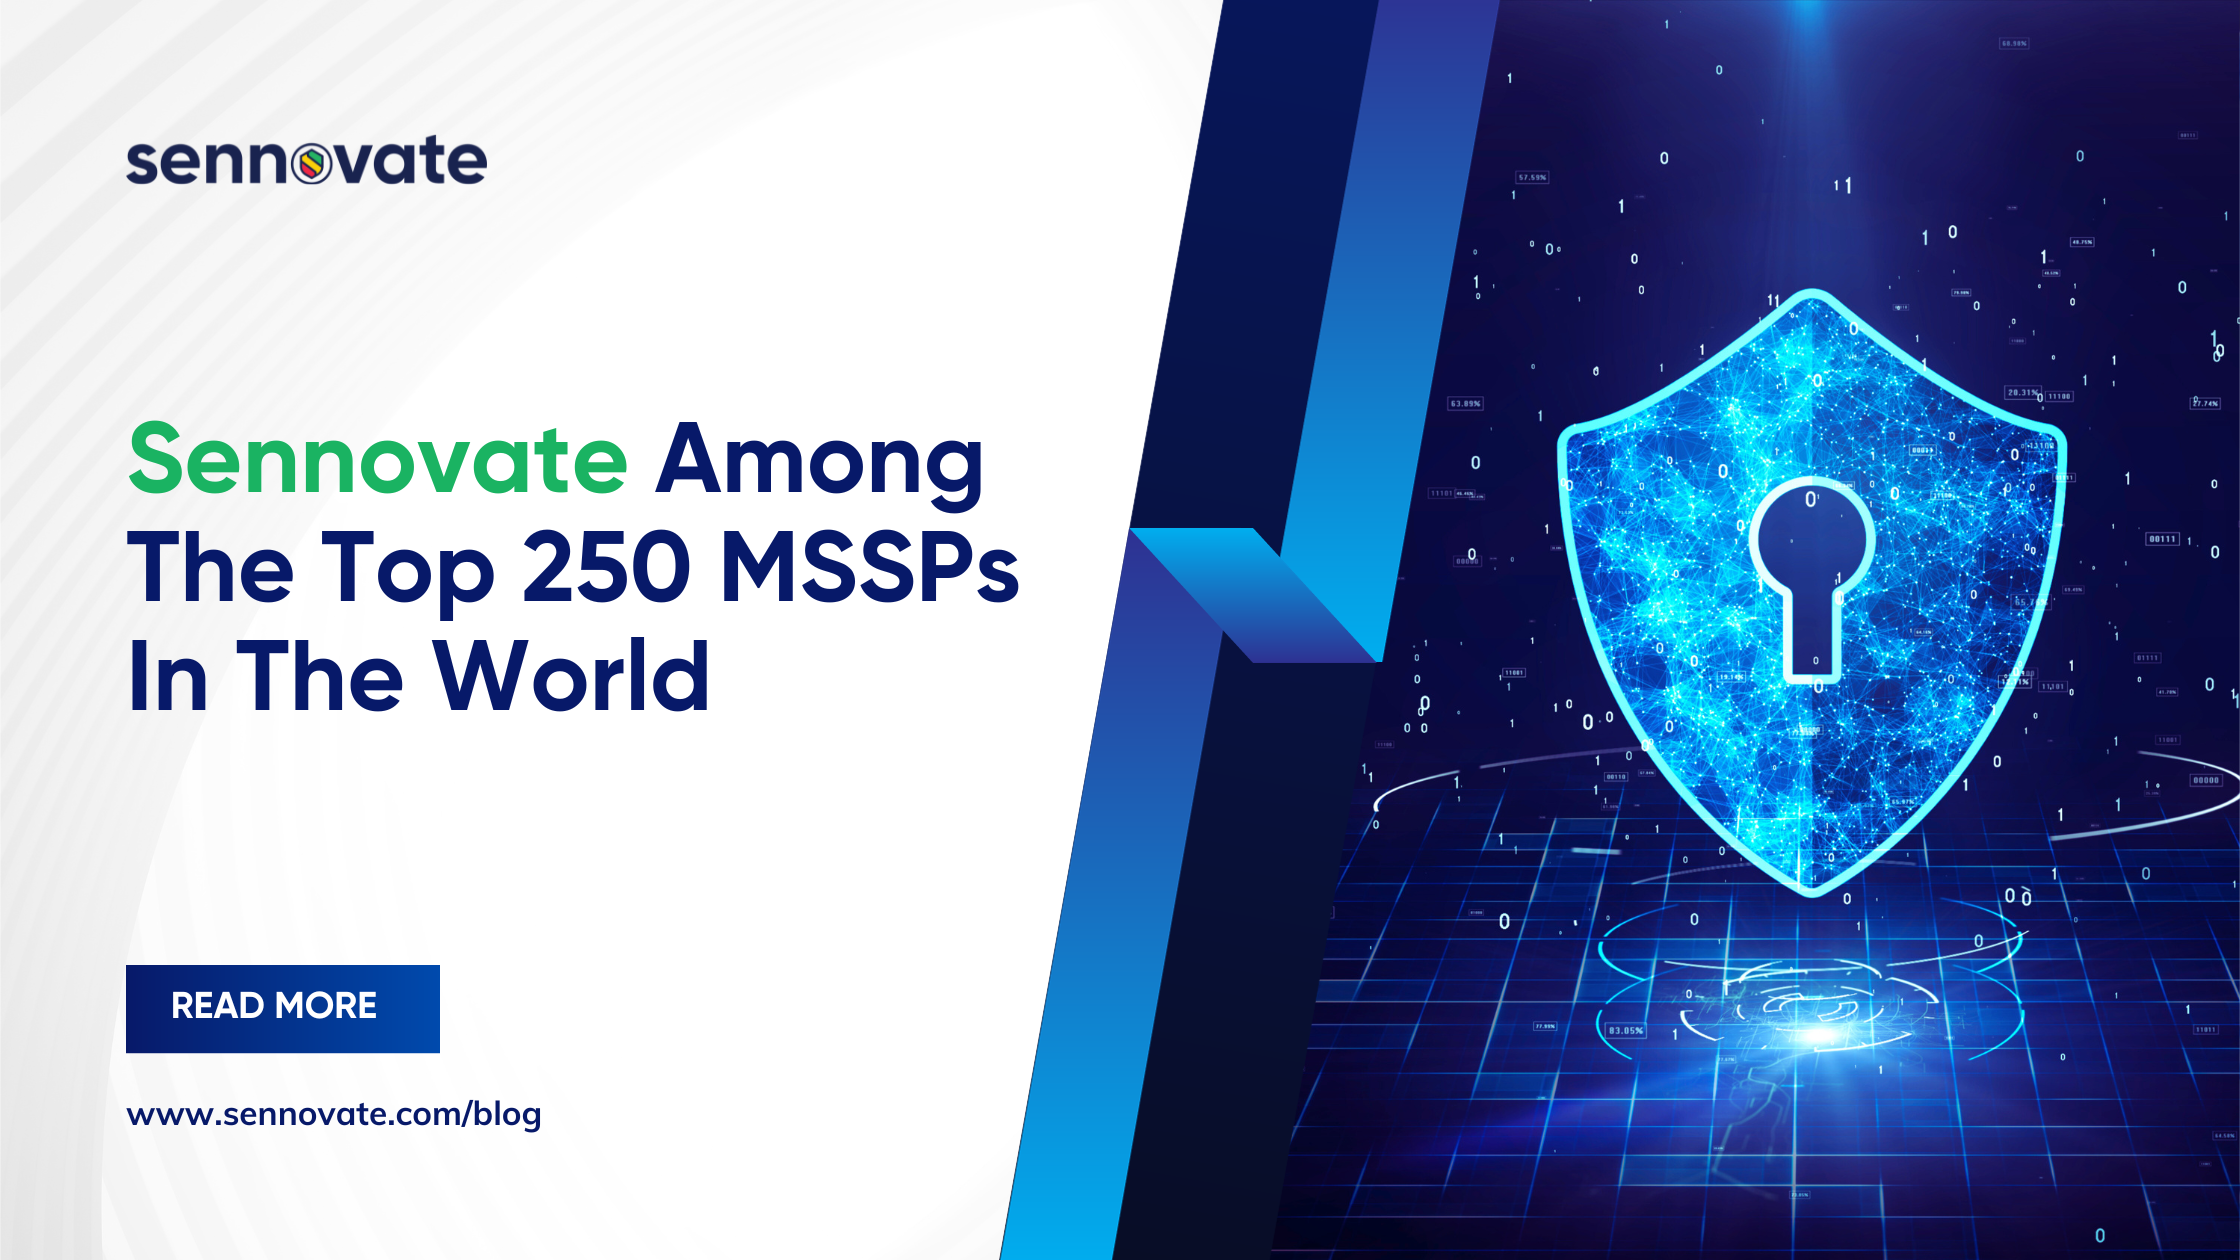 Sennovate Among the Top 250 MSSPs in the world